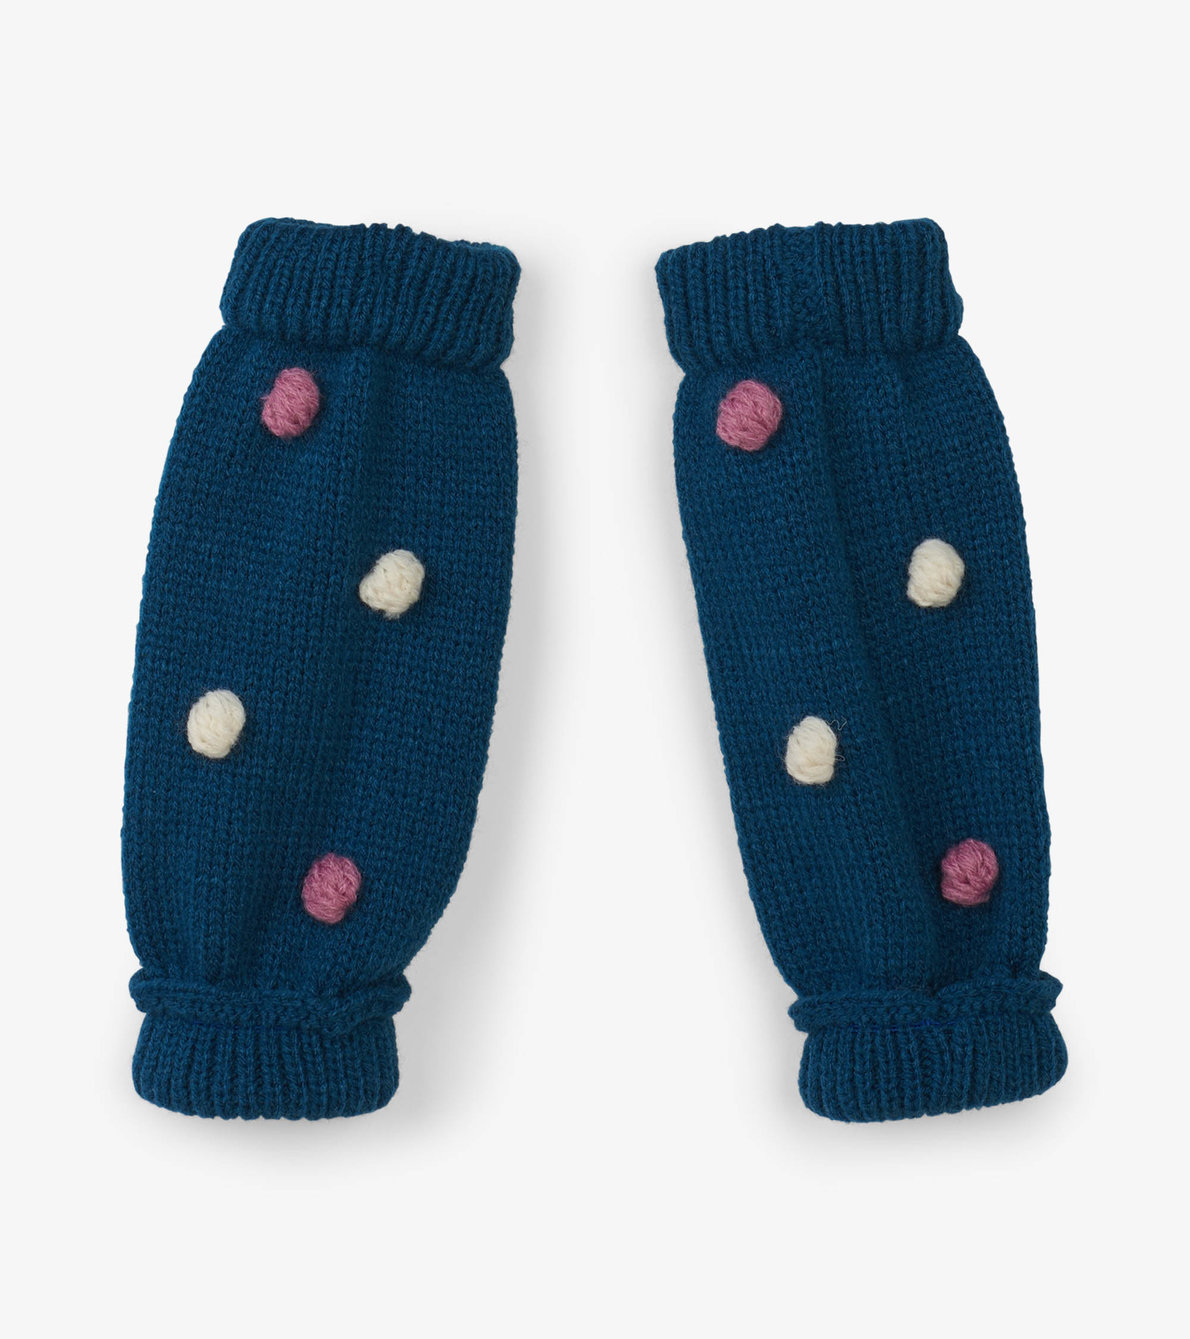 View larger image of Precious Pom Poms Baby Leg Warmers